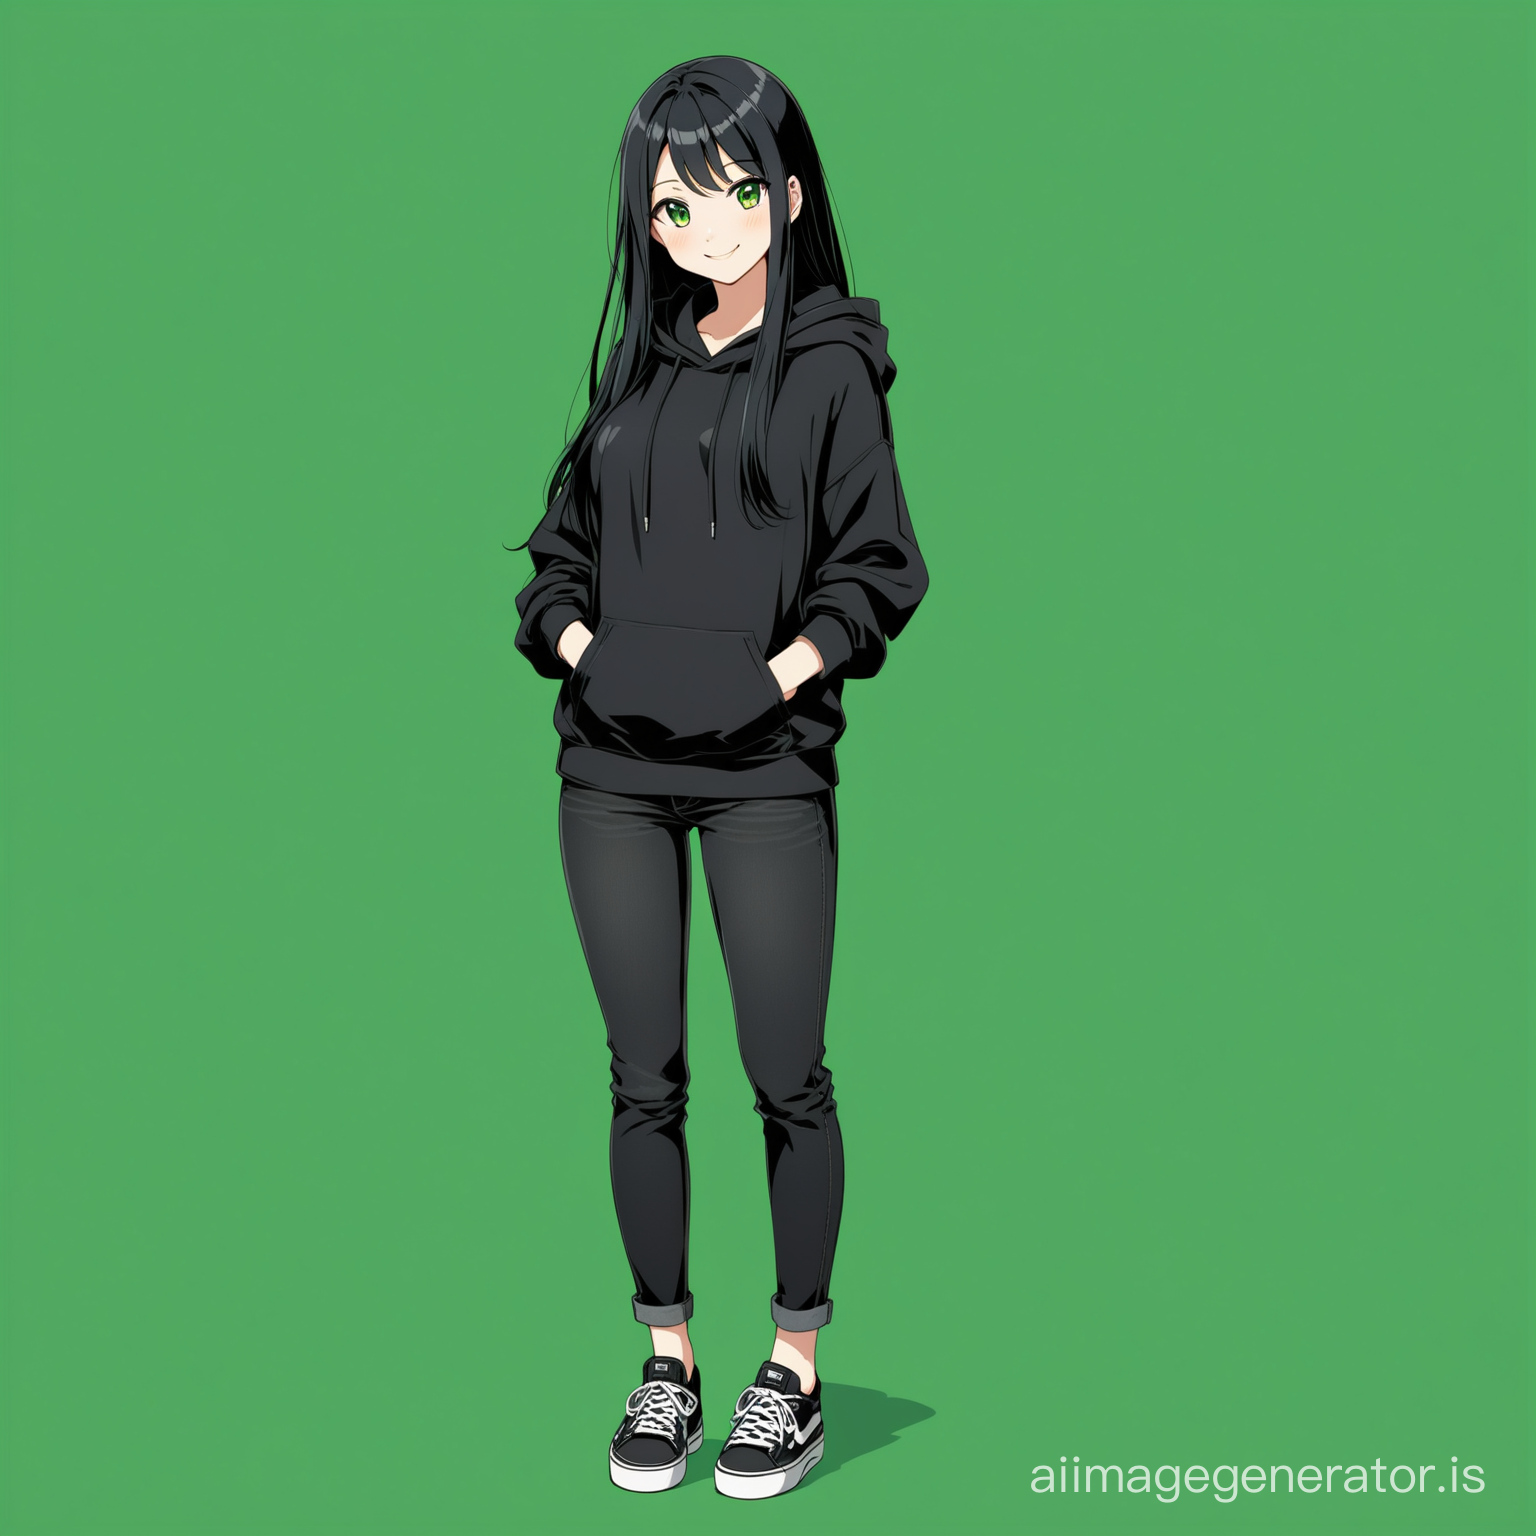 Anime girl with black jeans and black hoodie, with black long smooth hair, with a smile, green solid background, full-length view